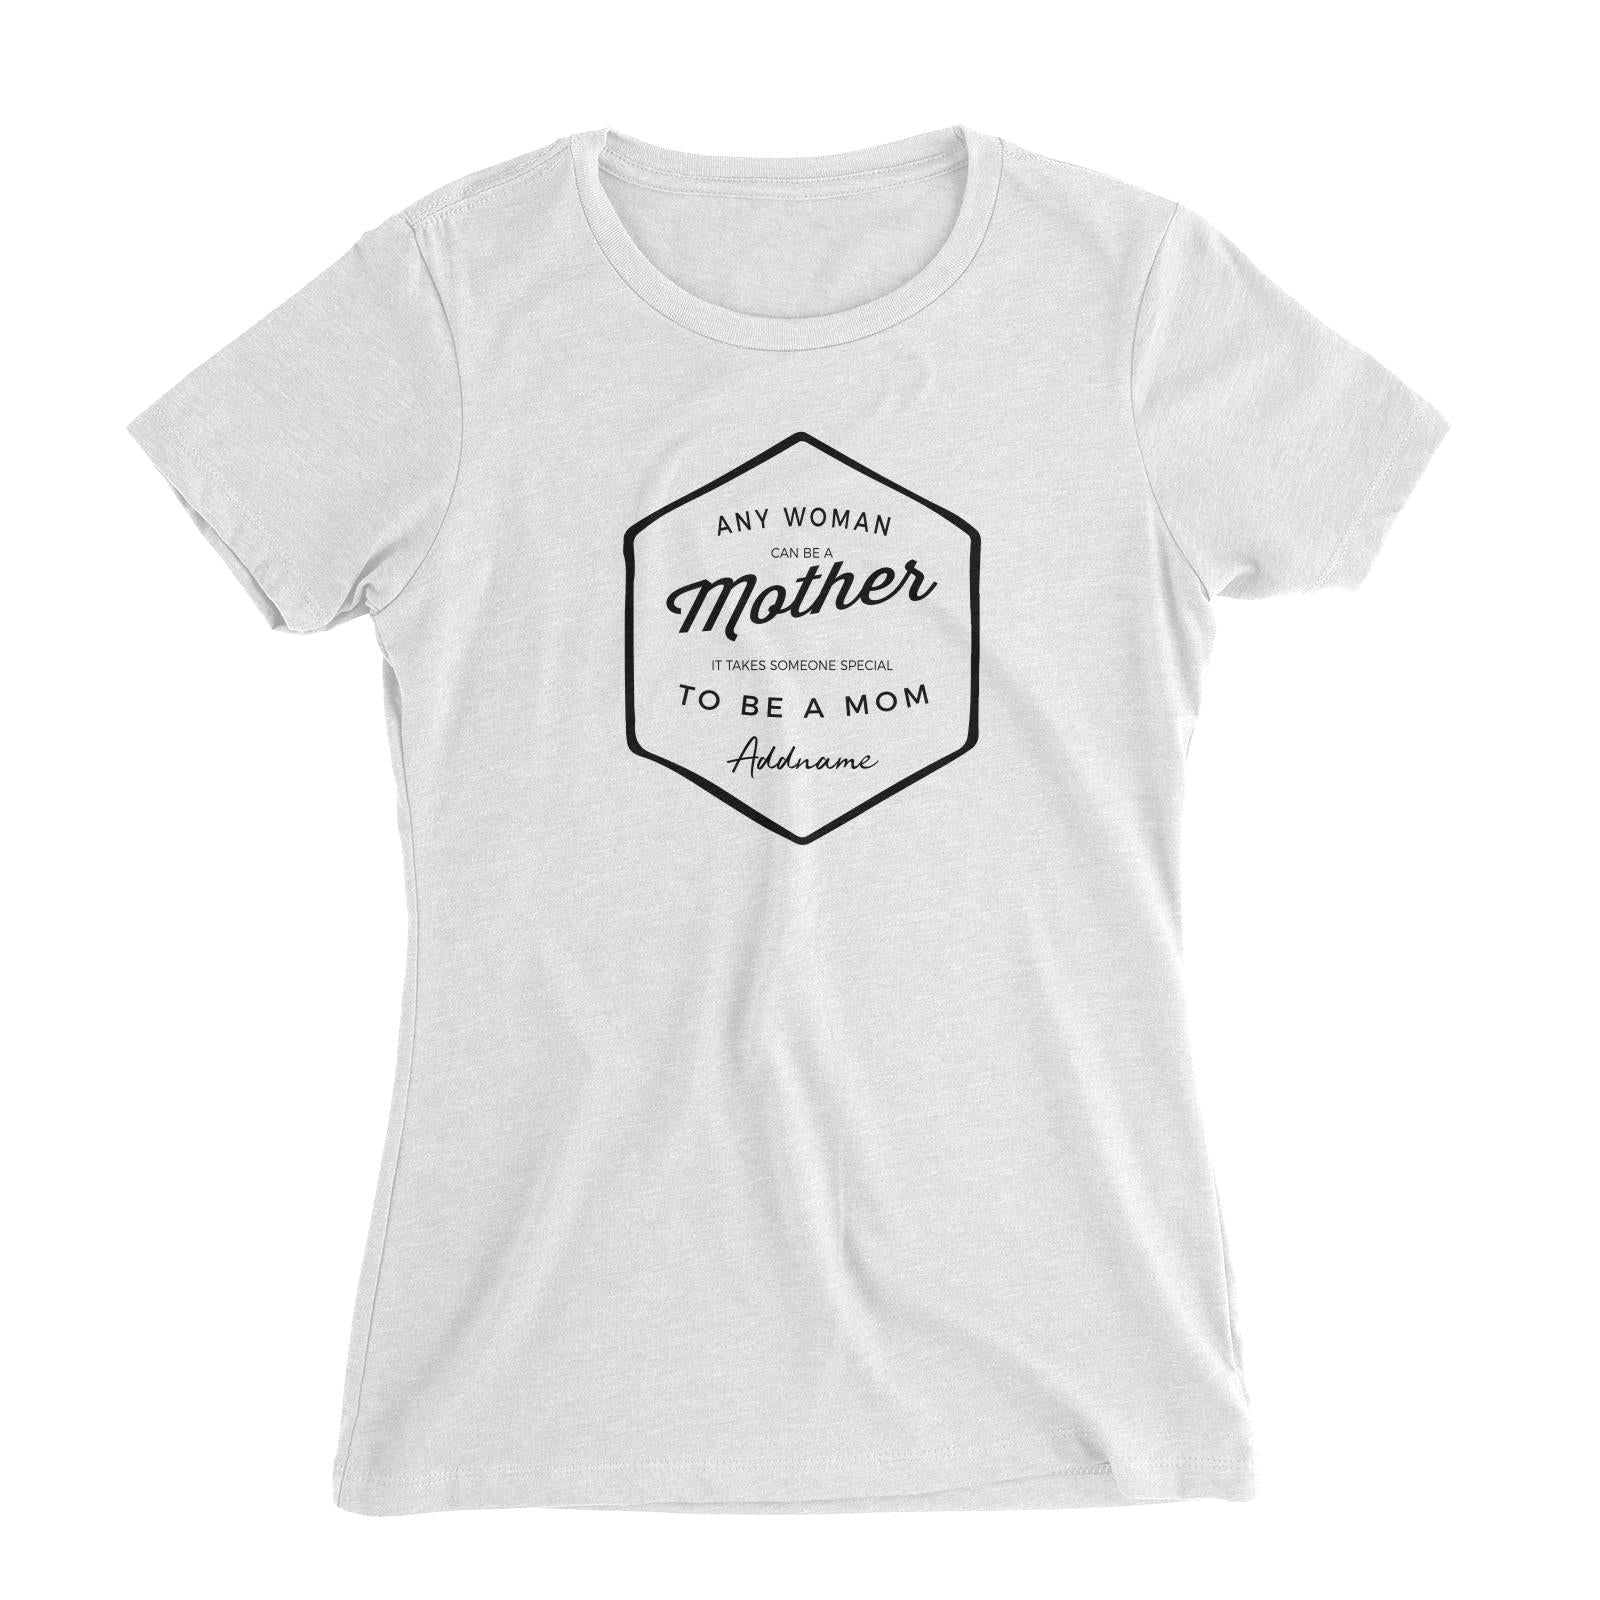 Mom Badge Any Woman Can Be A Mother Addname Women's Slim Fit T-Shirt